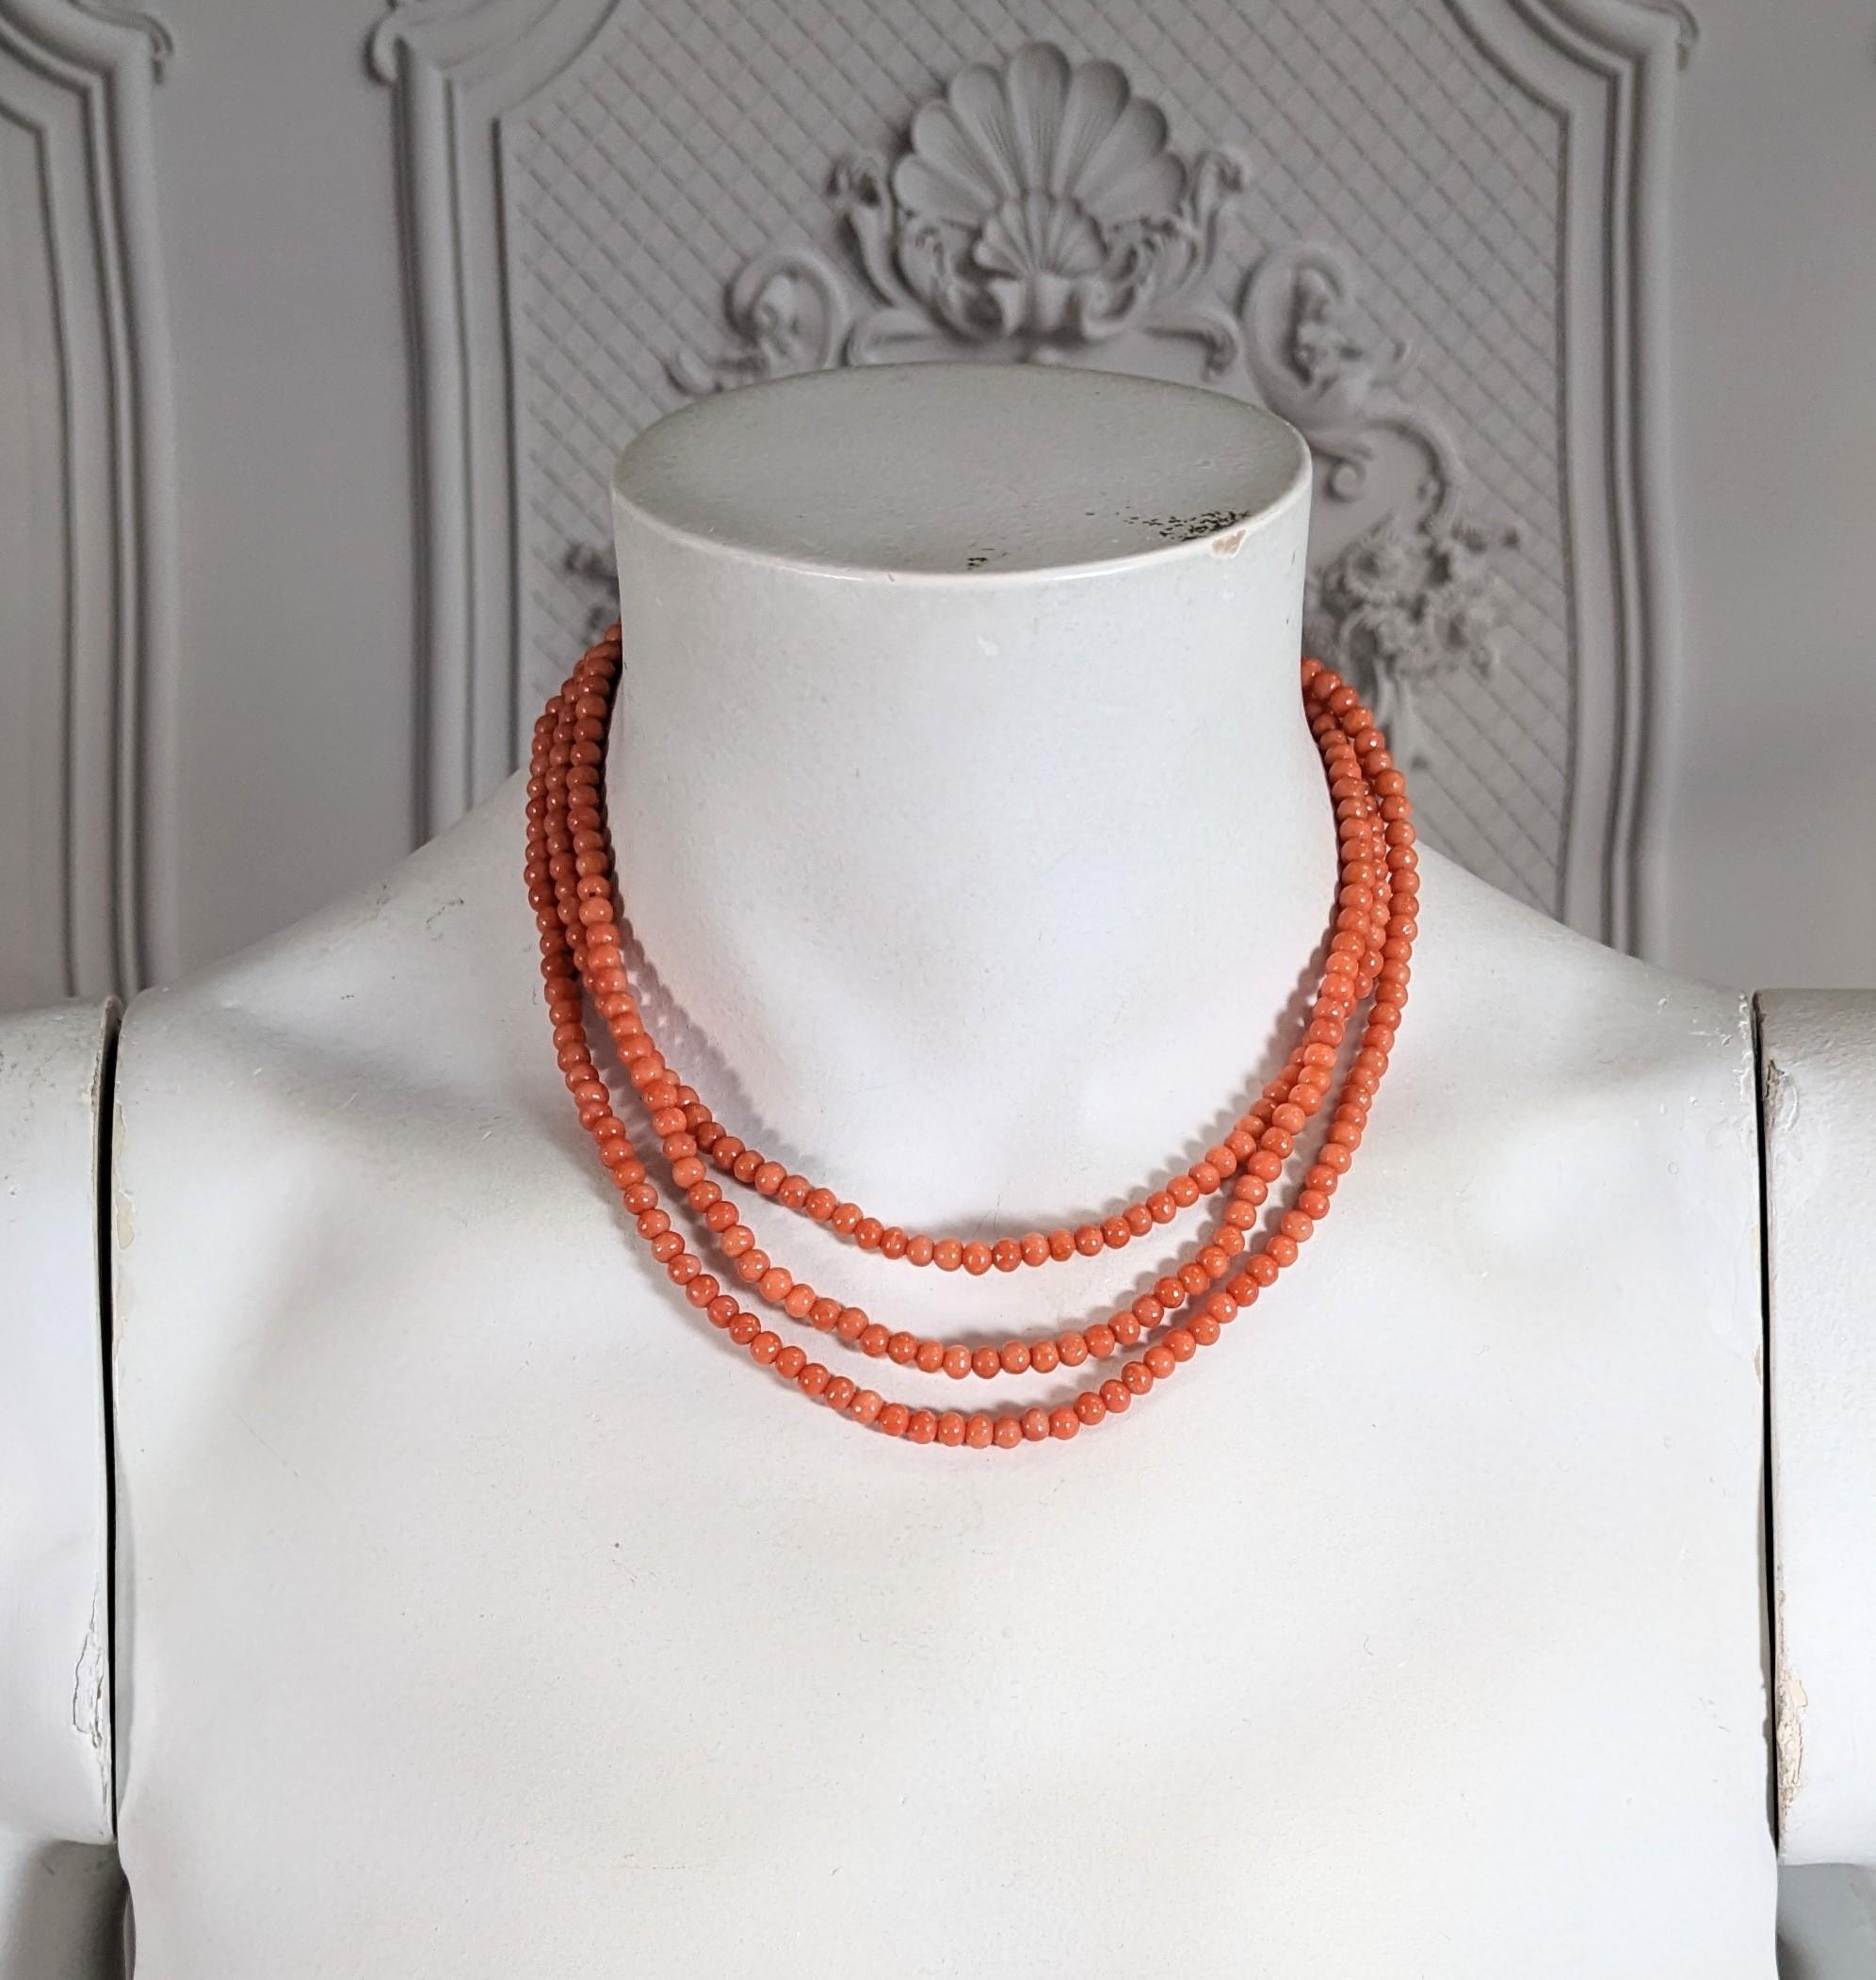 Long Victorian Genuine Coral Beads from the late 19th Century. Super versatile which can be wrapped several times on neck or wrist. Lovely salmon orange tones. 4-5 mm beads. 46